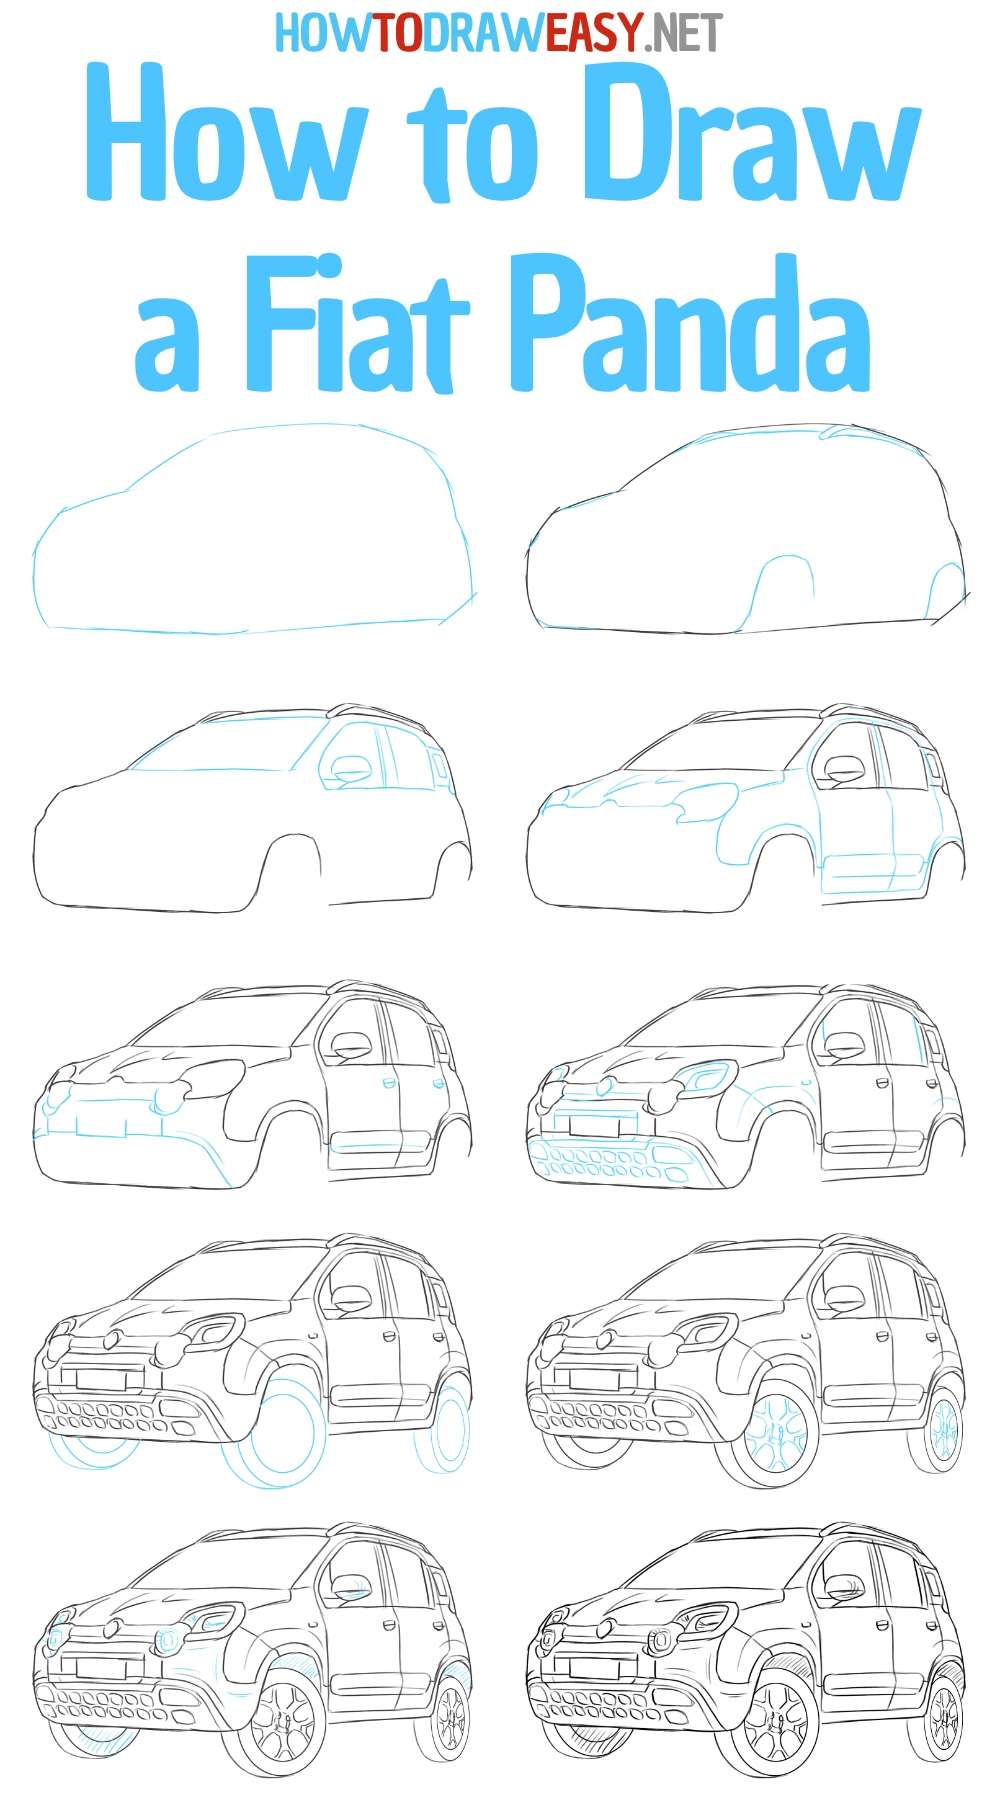 How to Draw a Fiat Panda Step by Step